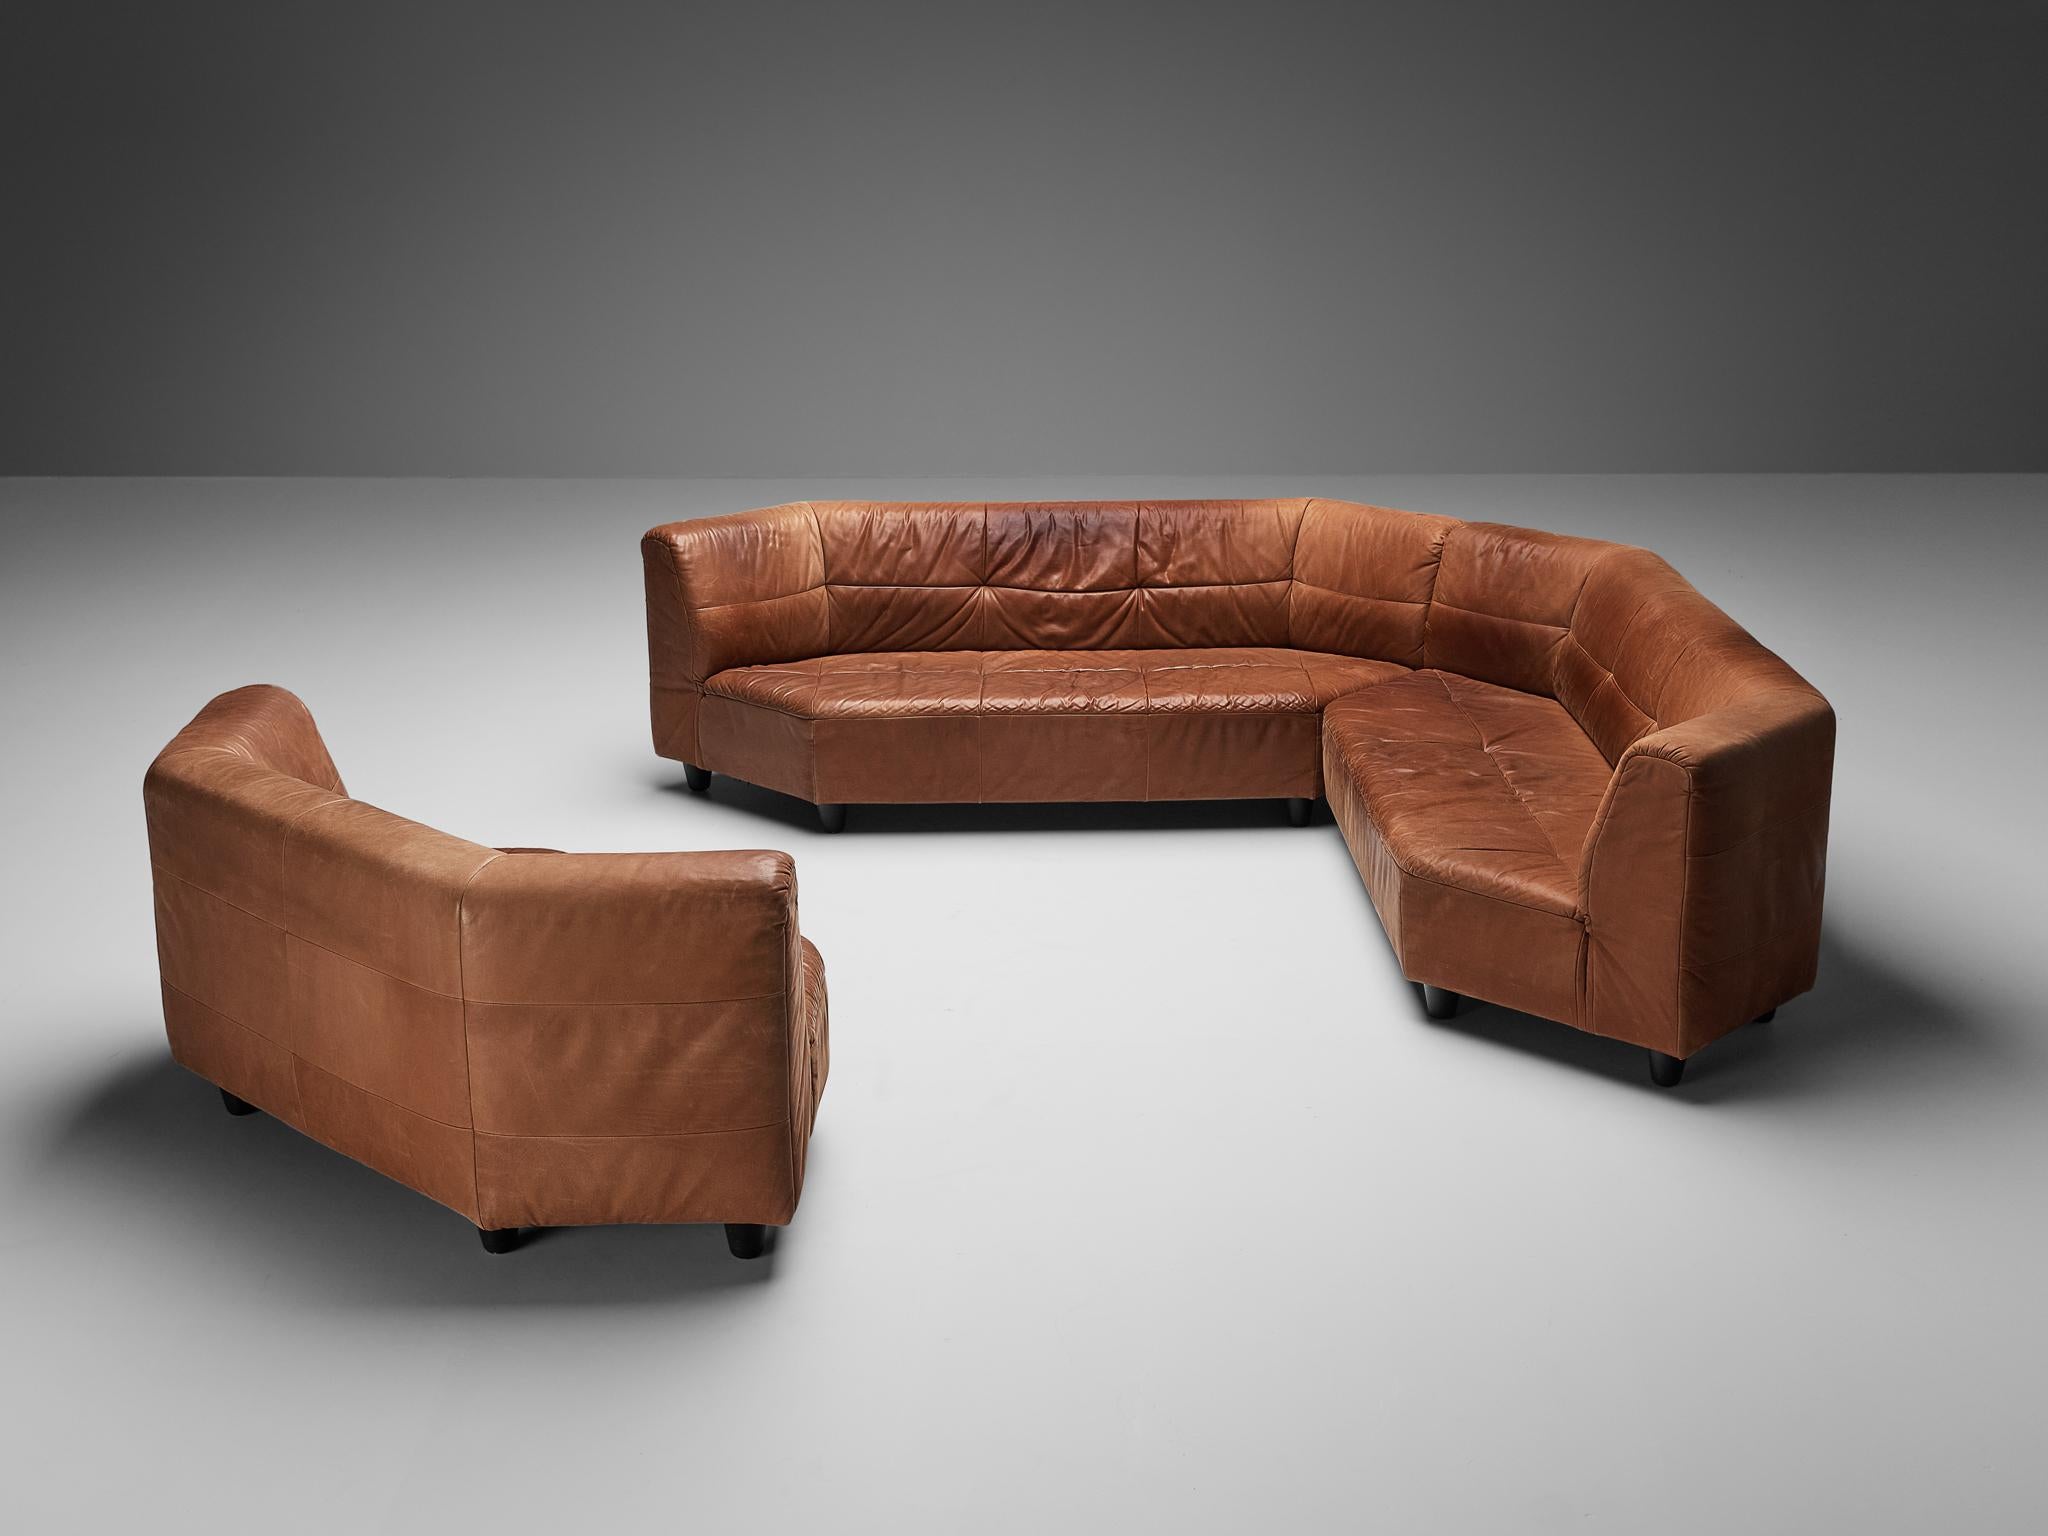 European Grand Geometric Sectional Sofa in Cognac Brown Leather  For Sale